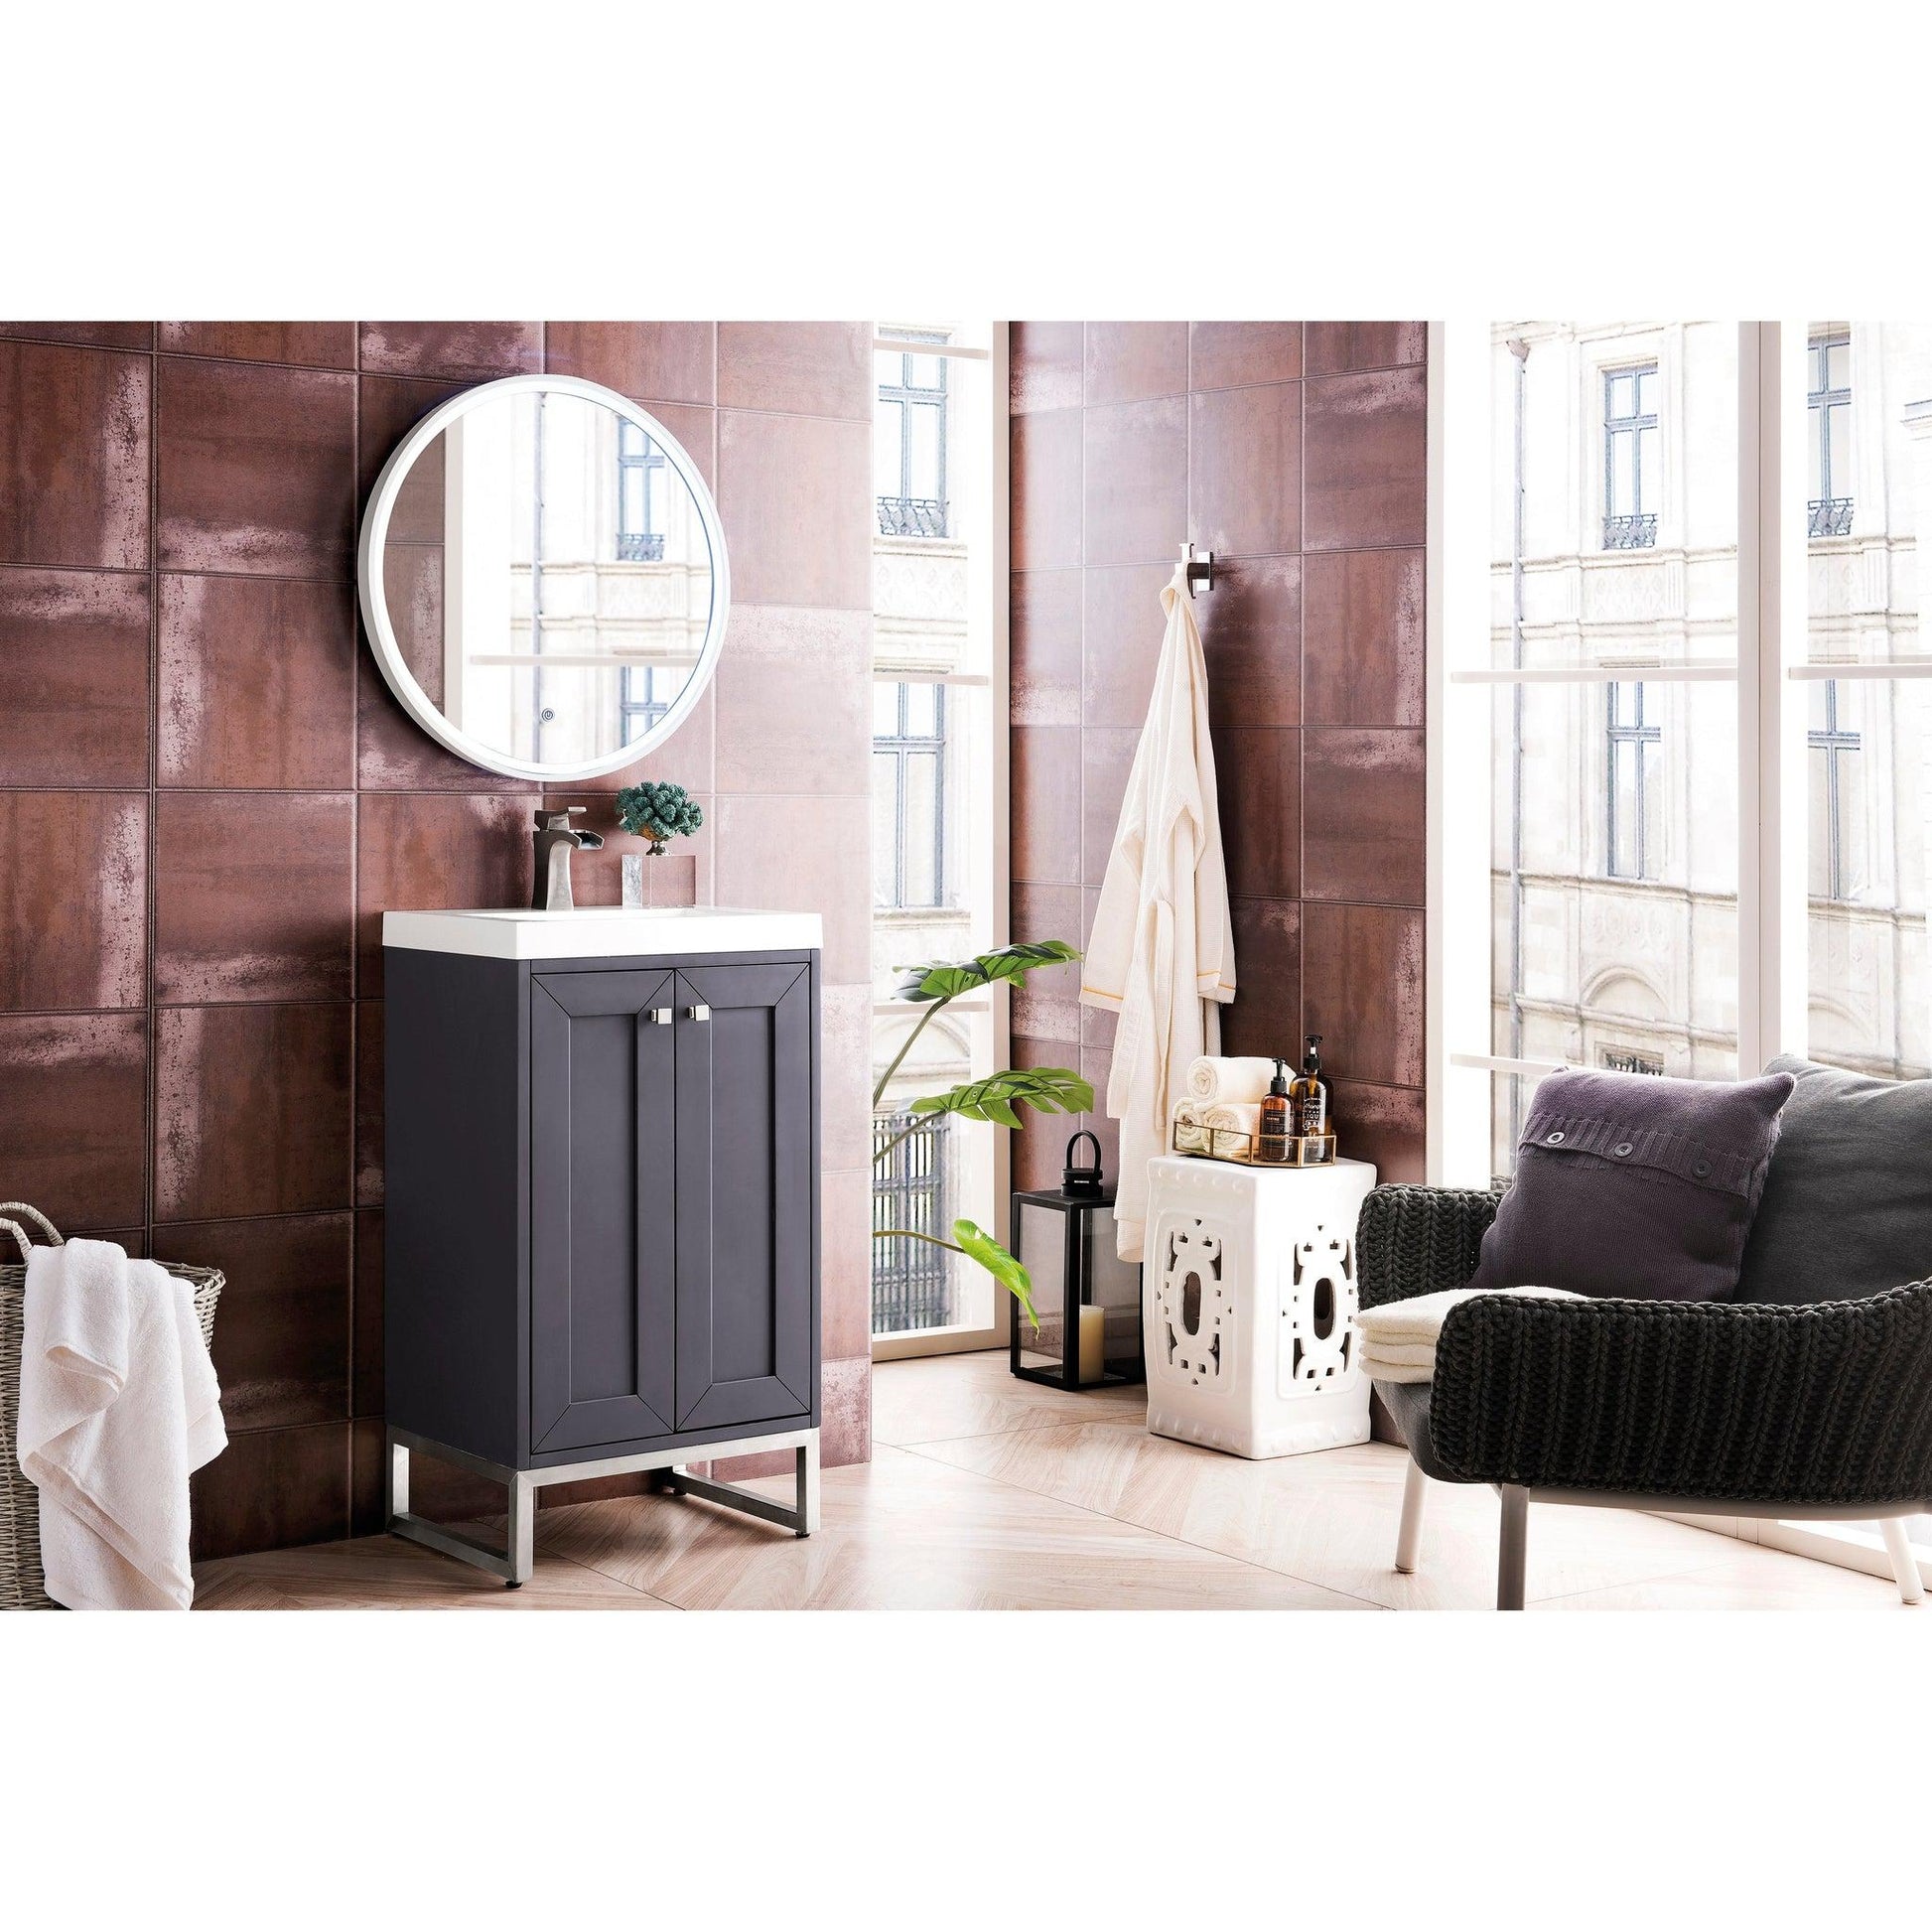 James Martin Vanities Chianti 20" Mineral Grey, Brushed Nickel Single Vanity Cabinet With White Glossy Composite Countertop